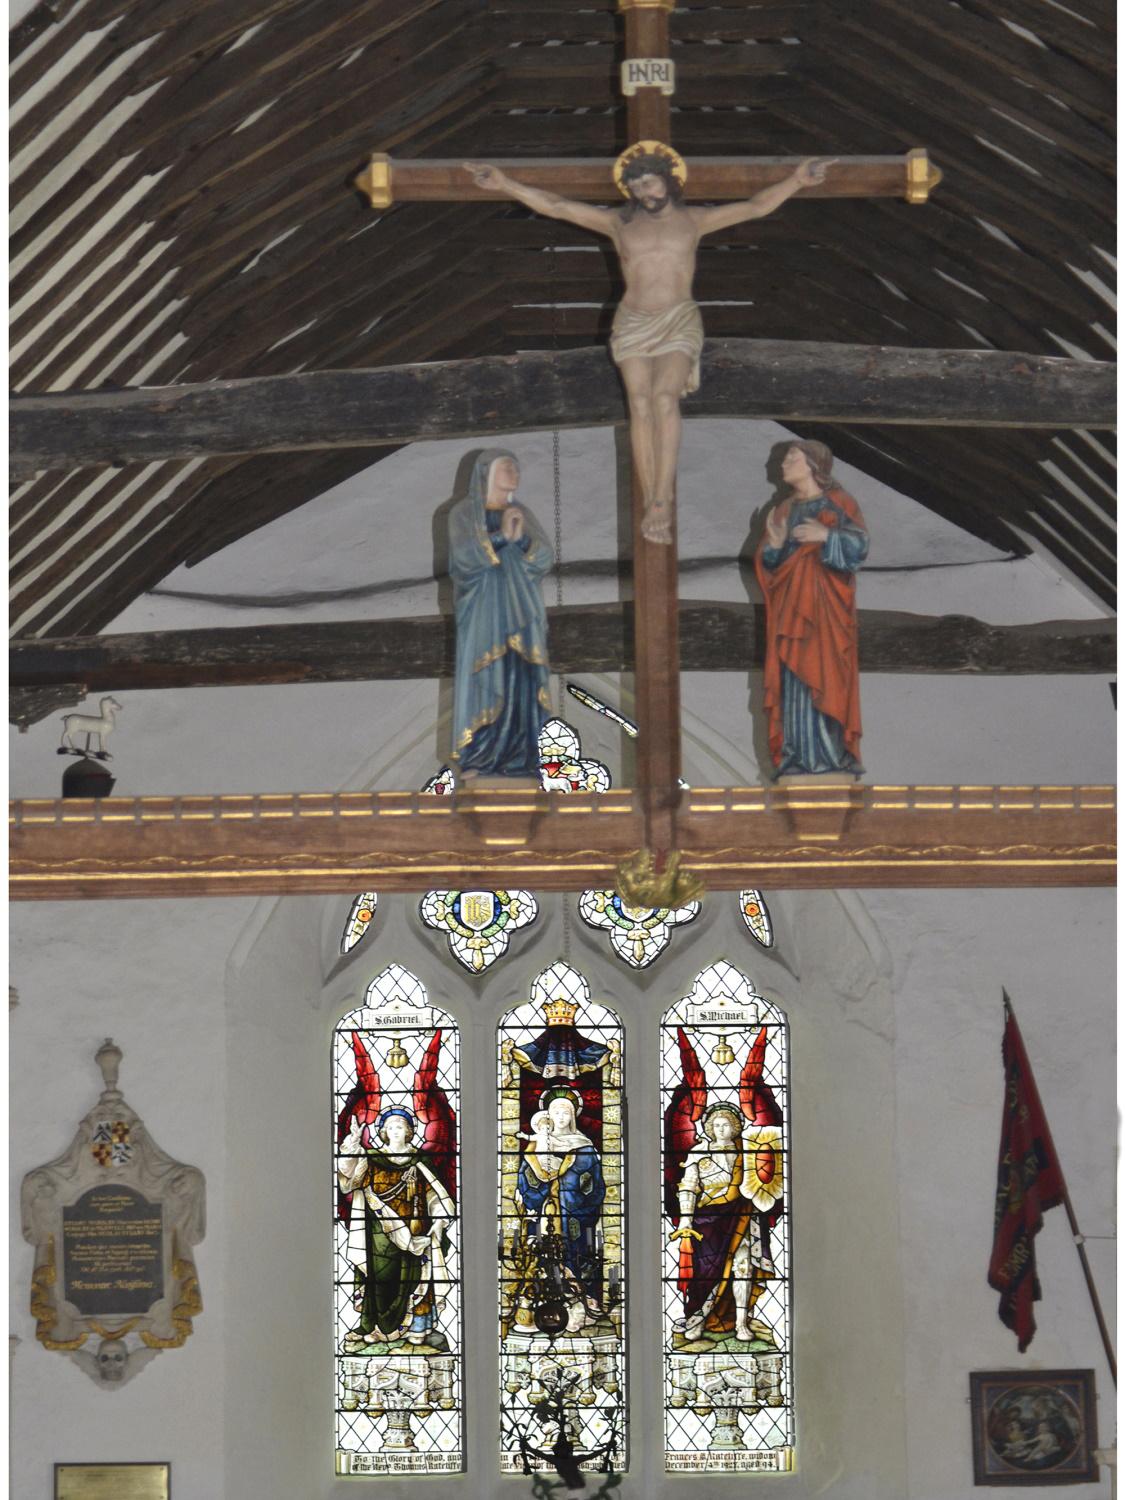 All Saints - Crucifix and Stained Glass Window